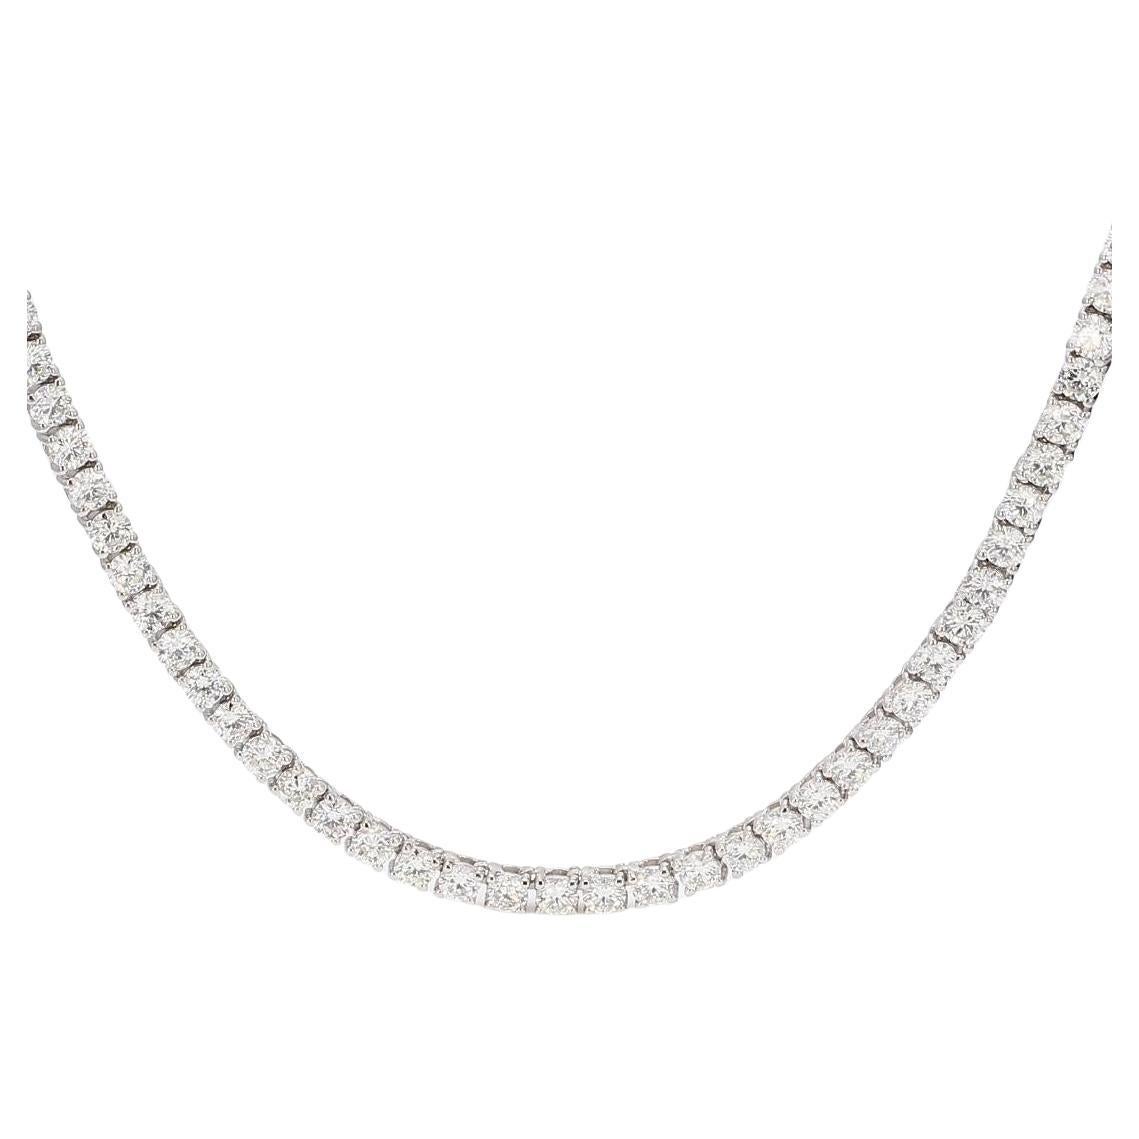 Tennis Necklace in 14K White Gold with Round Diamonds. D26.11ct.t.w.